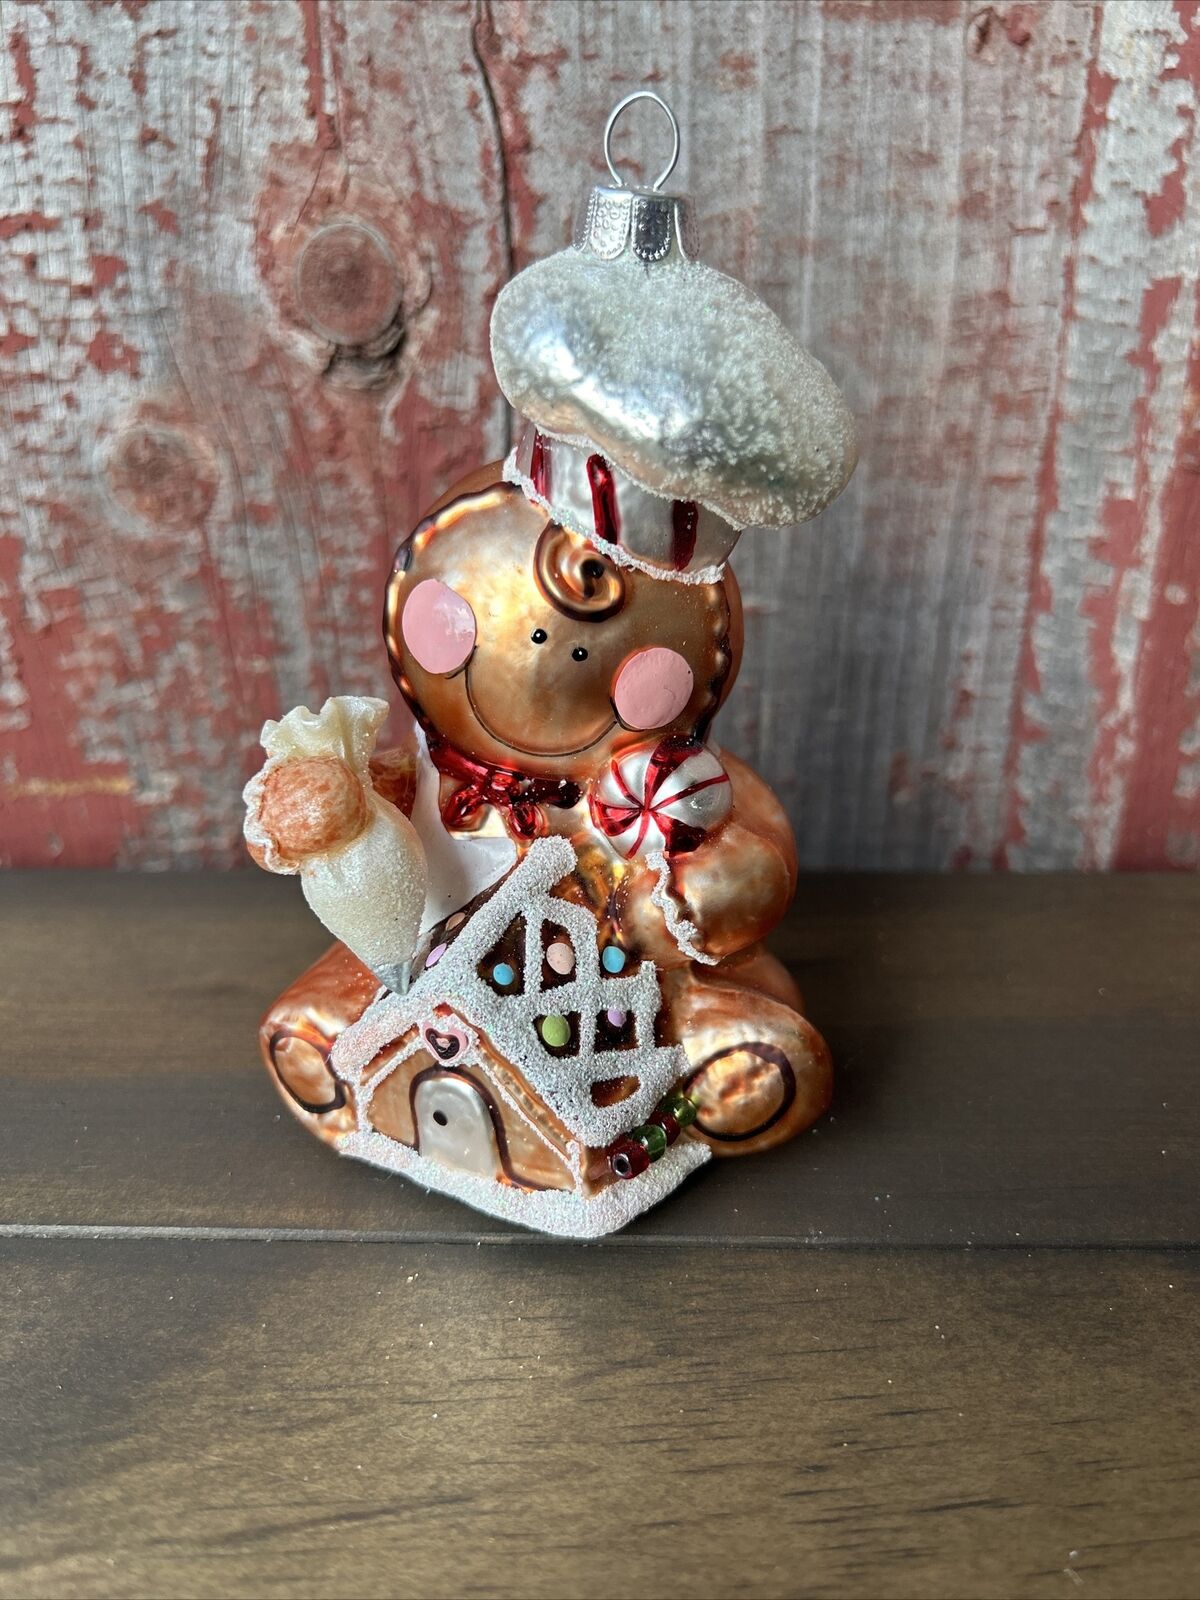 Robert Stanley Blown Glass Christmas Holiday Ornament Gingerbread Man Candy